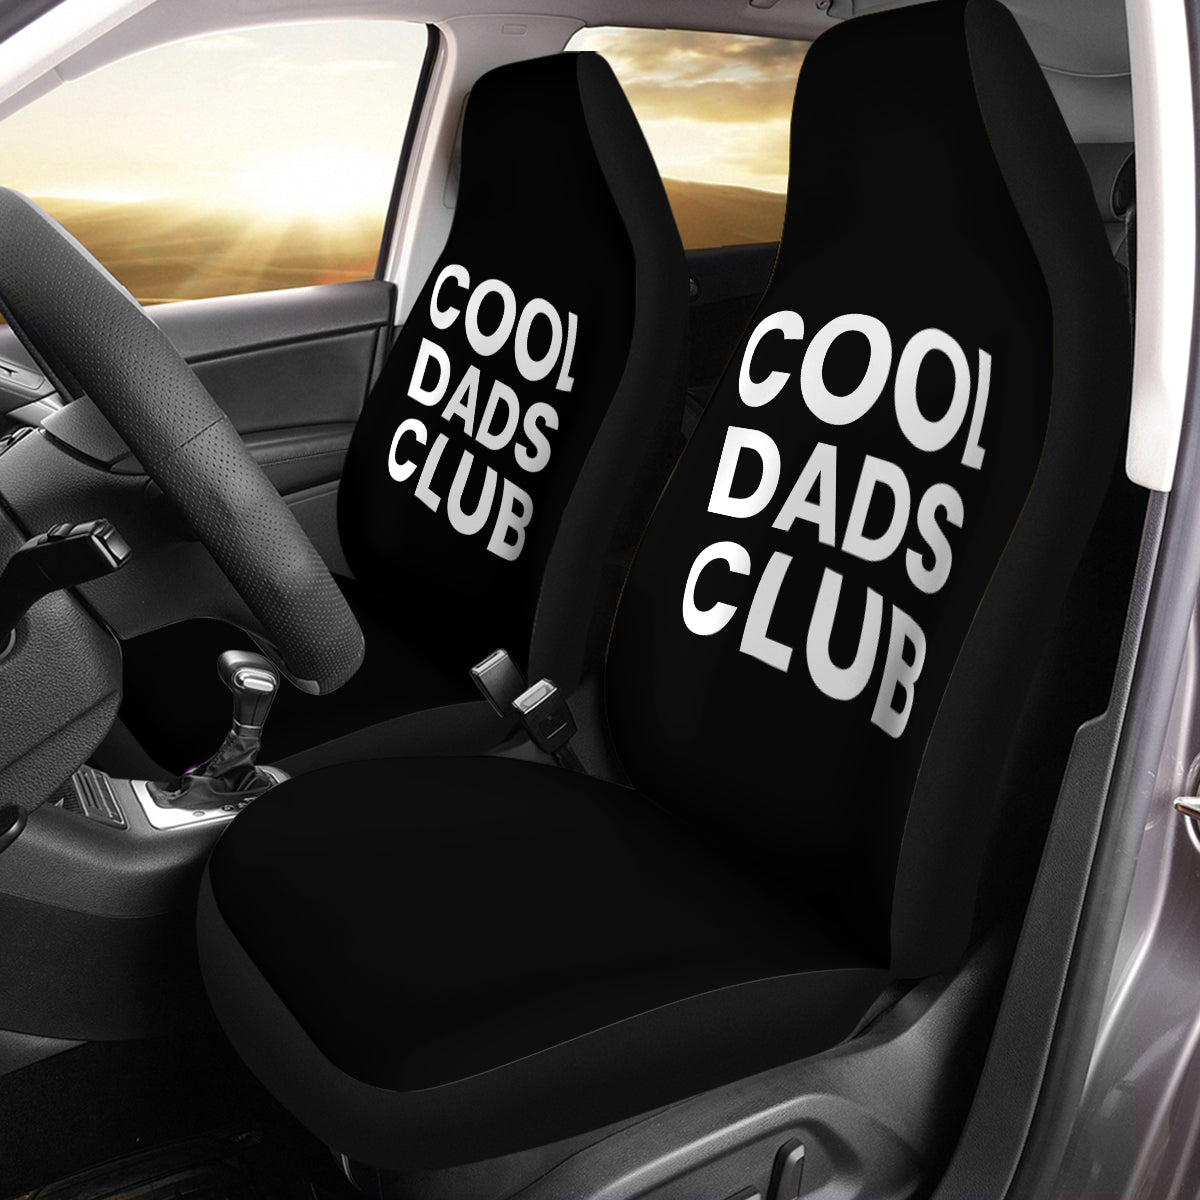 Car Seat Covers, Cool Dads Club Car Seat Covers, Custom For Your Cars, Car Bucket Seat Protection Airbag Compatible 2 PCS, Father's Day Gift, Car Accessories 02